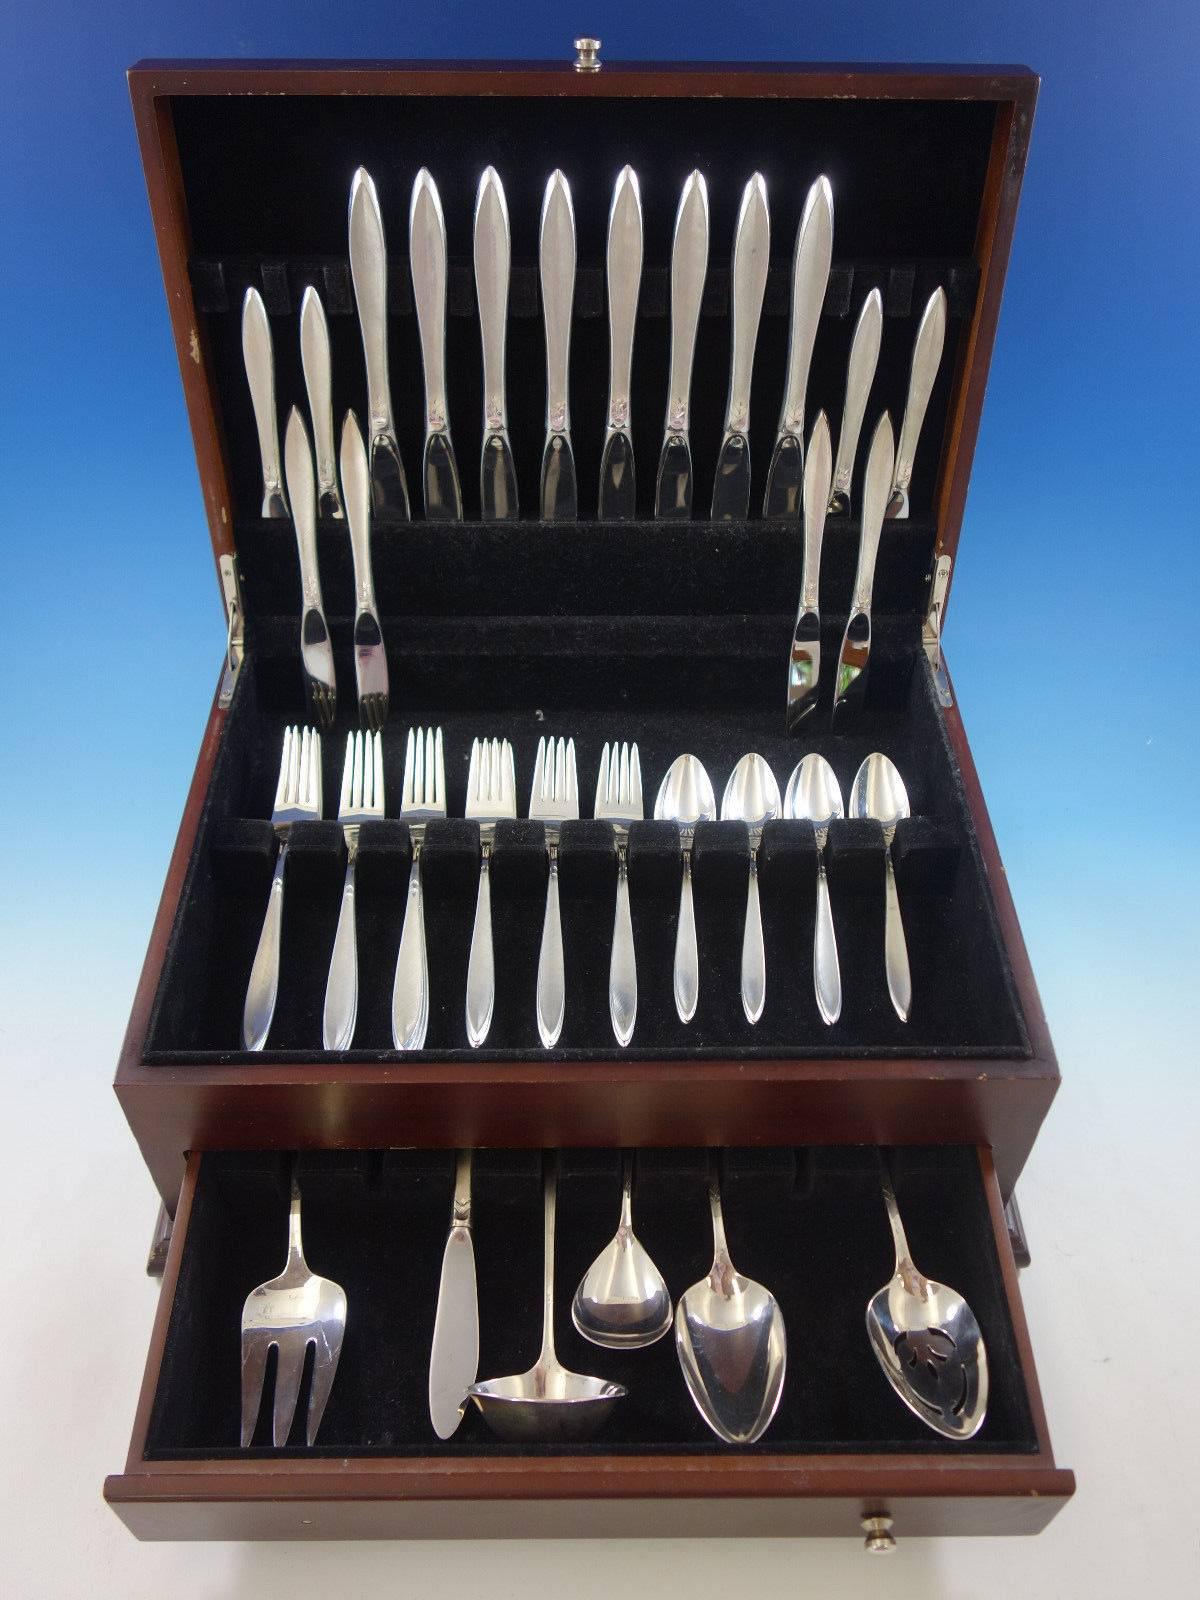 Gossamer by Gorham sterling silver flatware set with brushed / matte / Florentine finish, 46 pieces. This set includes: 

eight knives, 8 7/8